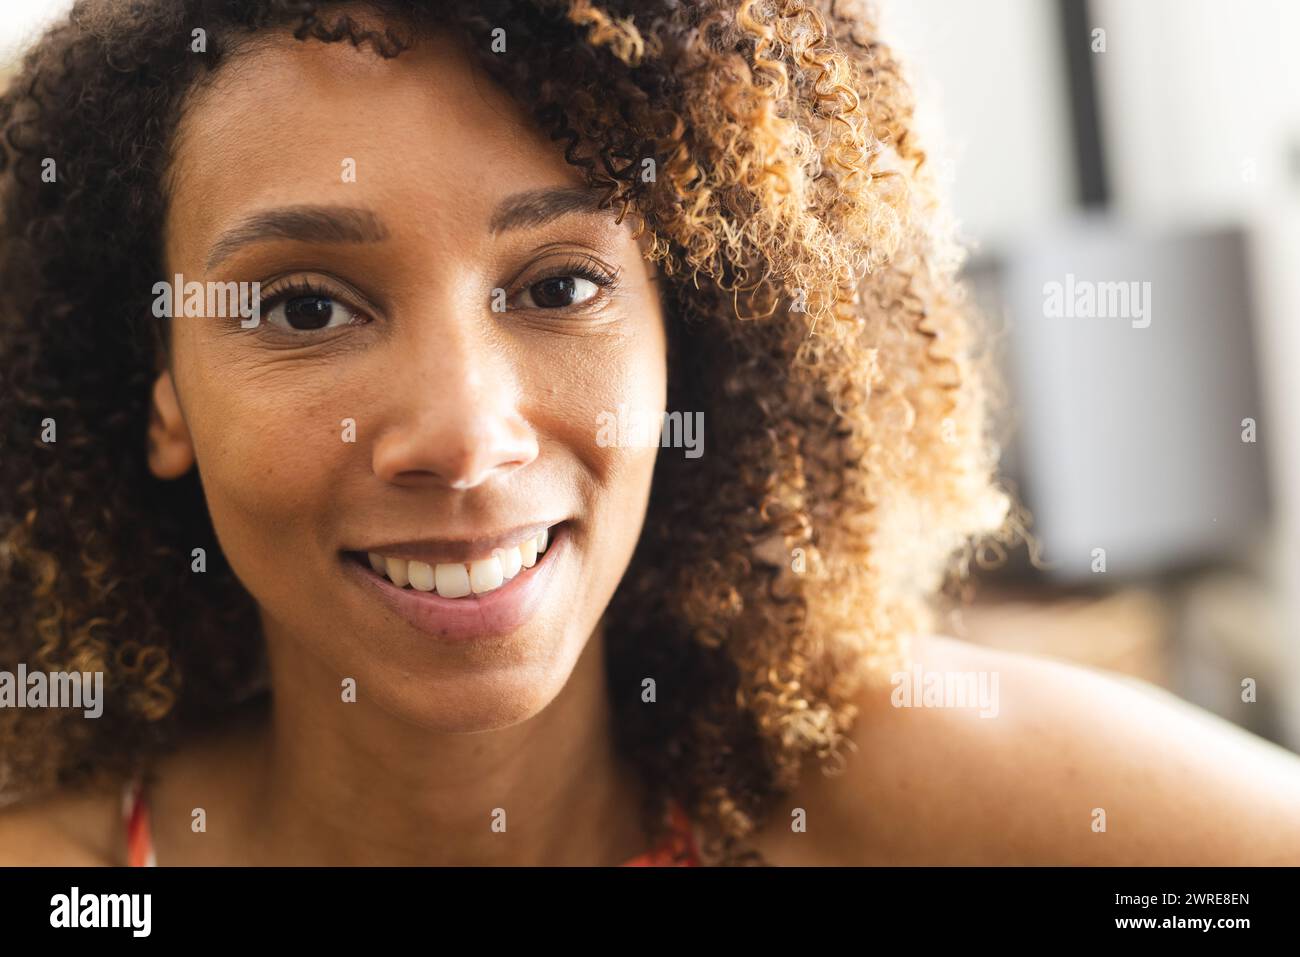 A biracial woman with curly hair smiles warmly at the camera Stock Photo